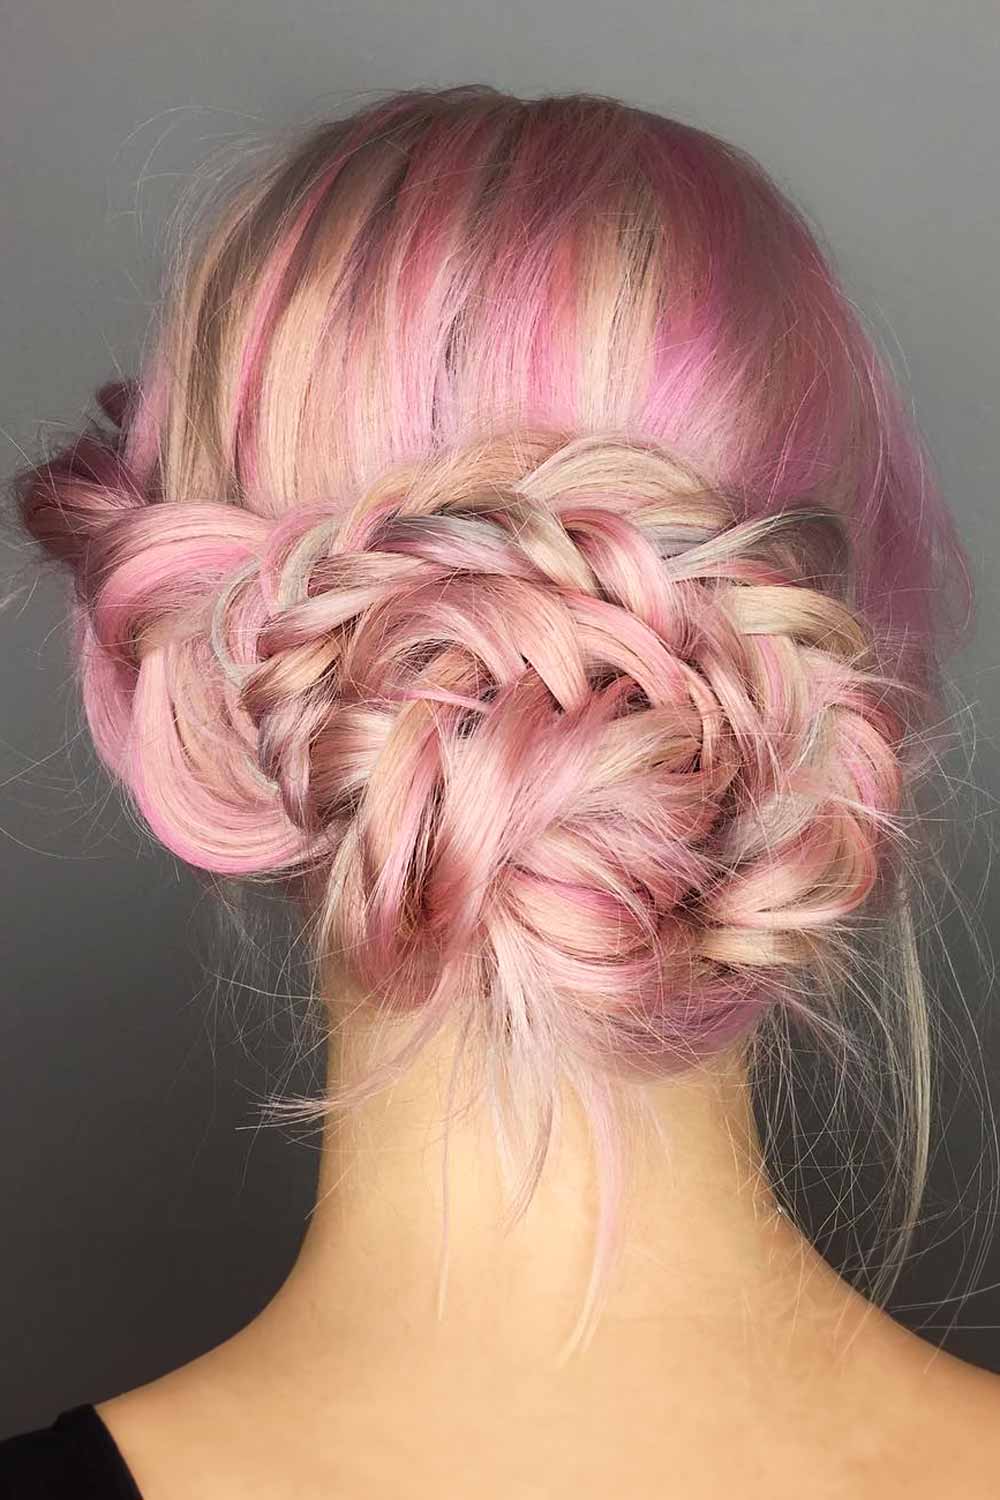 Dirty Blonde Haircut With Pink Highlights #dirtyblondehair #dirtyblonde #blondehair #blonde